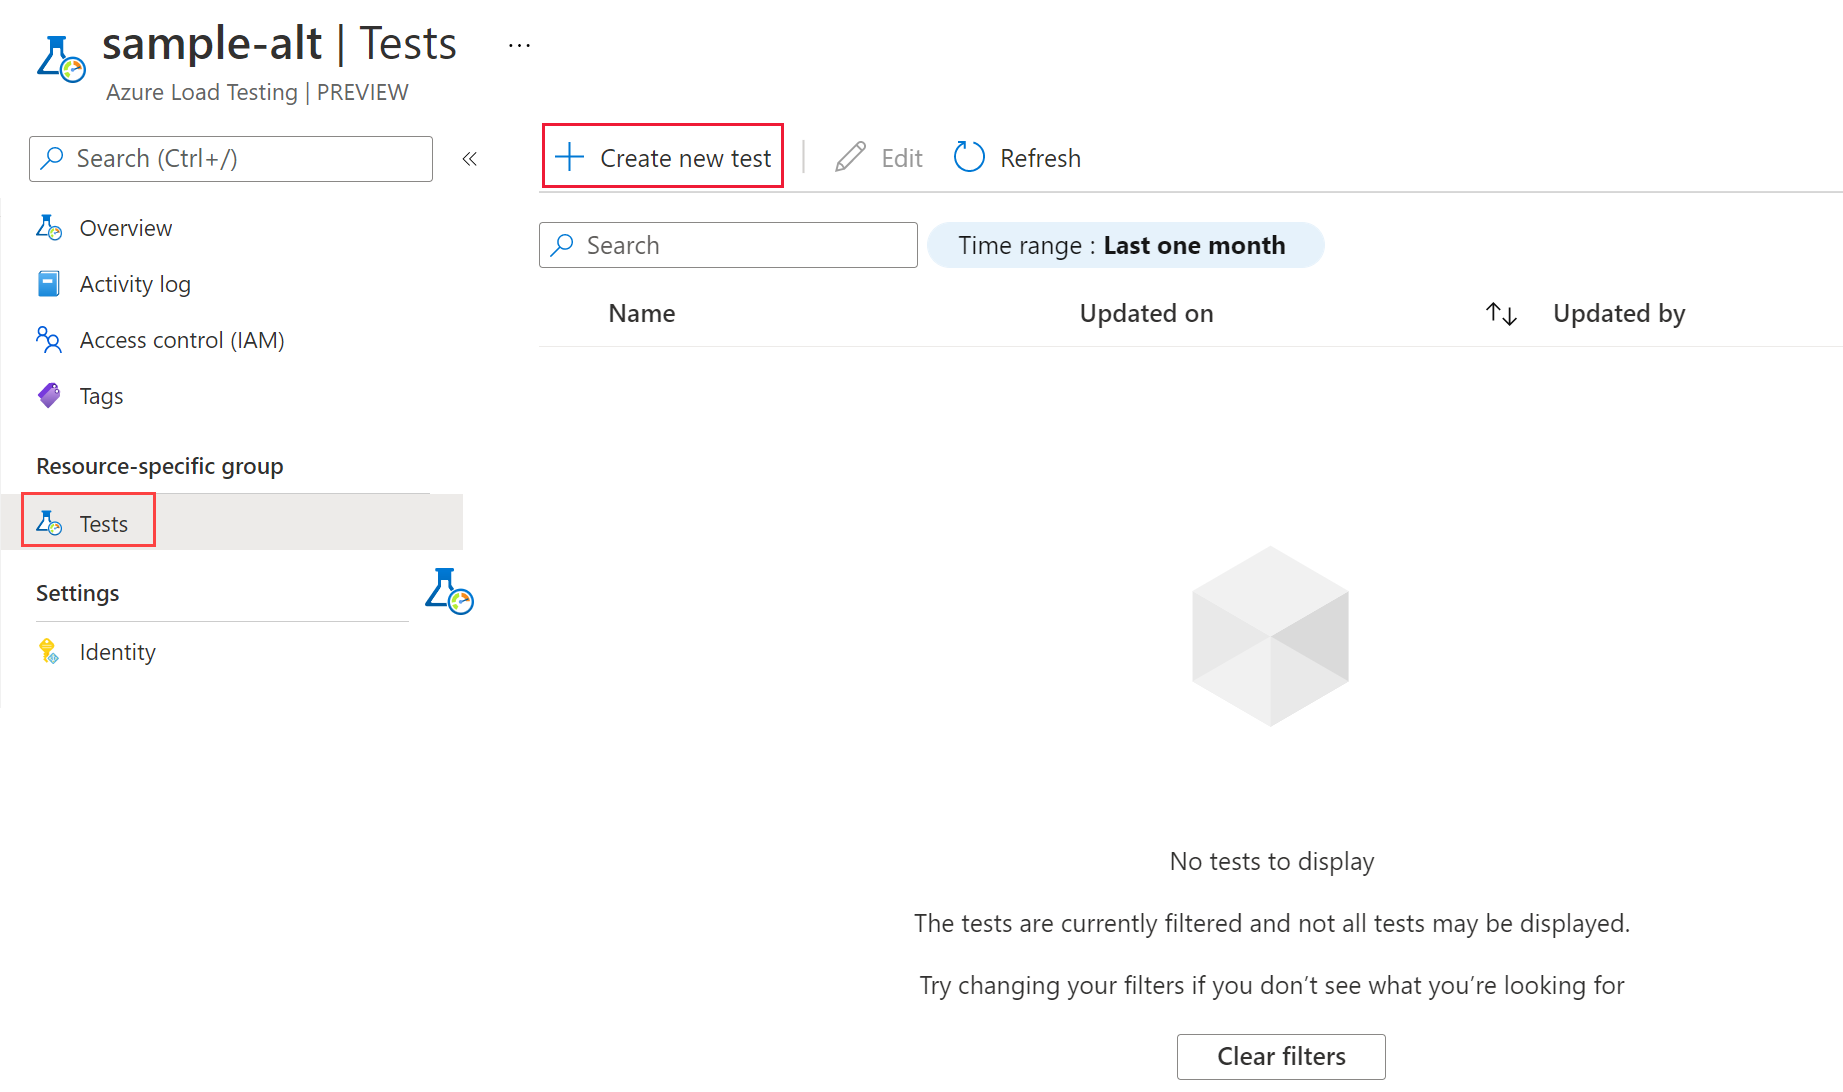 Screenshot that shows the Azure Load Testing page and the button for creating a new test.